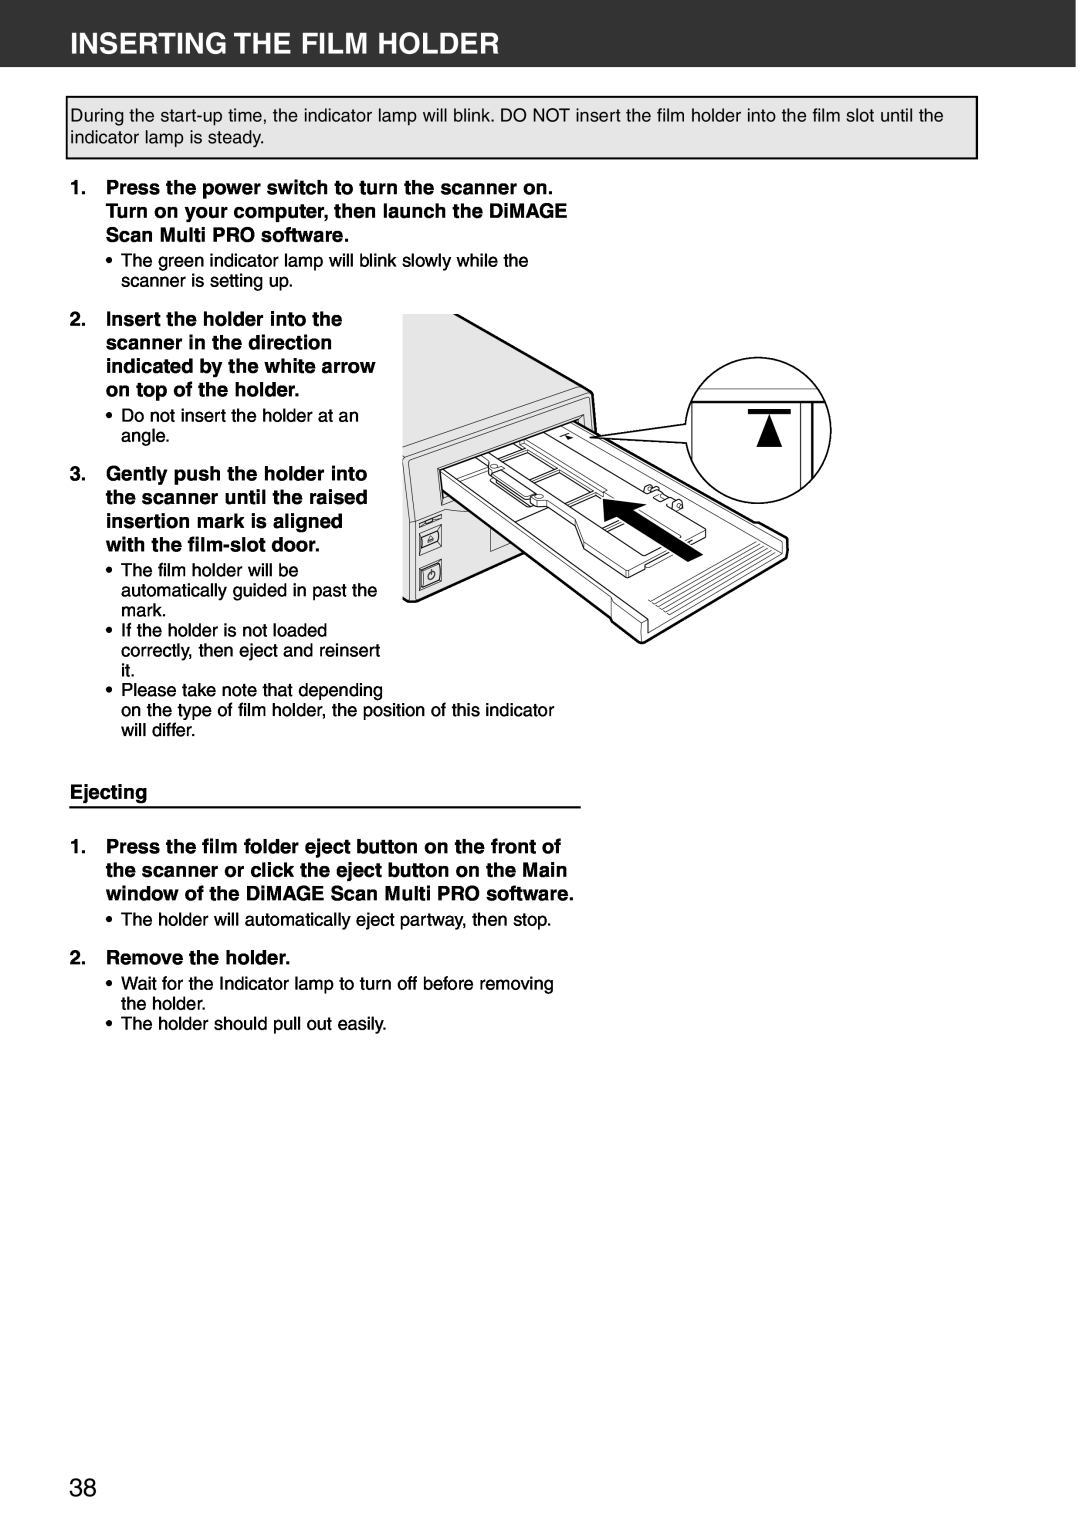 Konica Minolta Scan Multi PRO instruction manual Inserting The Film Holder, Ejecting, Remove the holder 